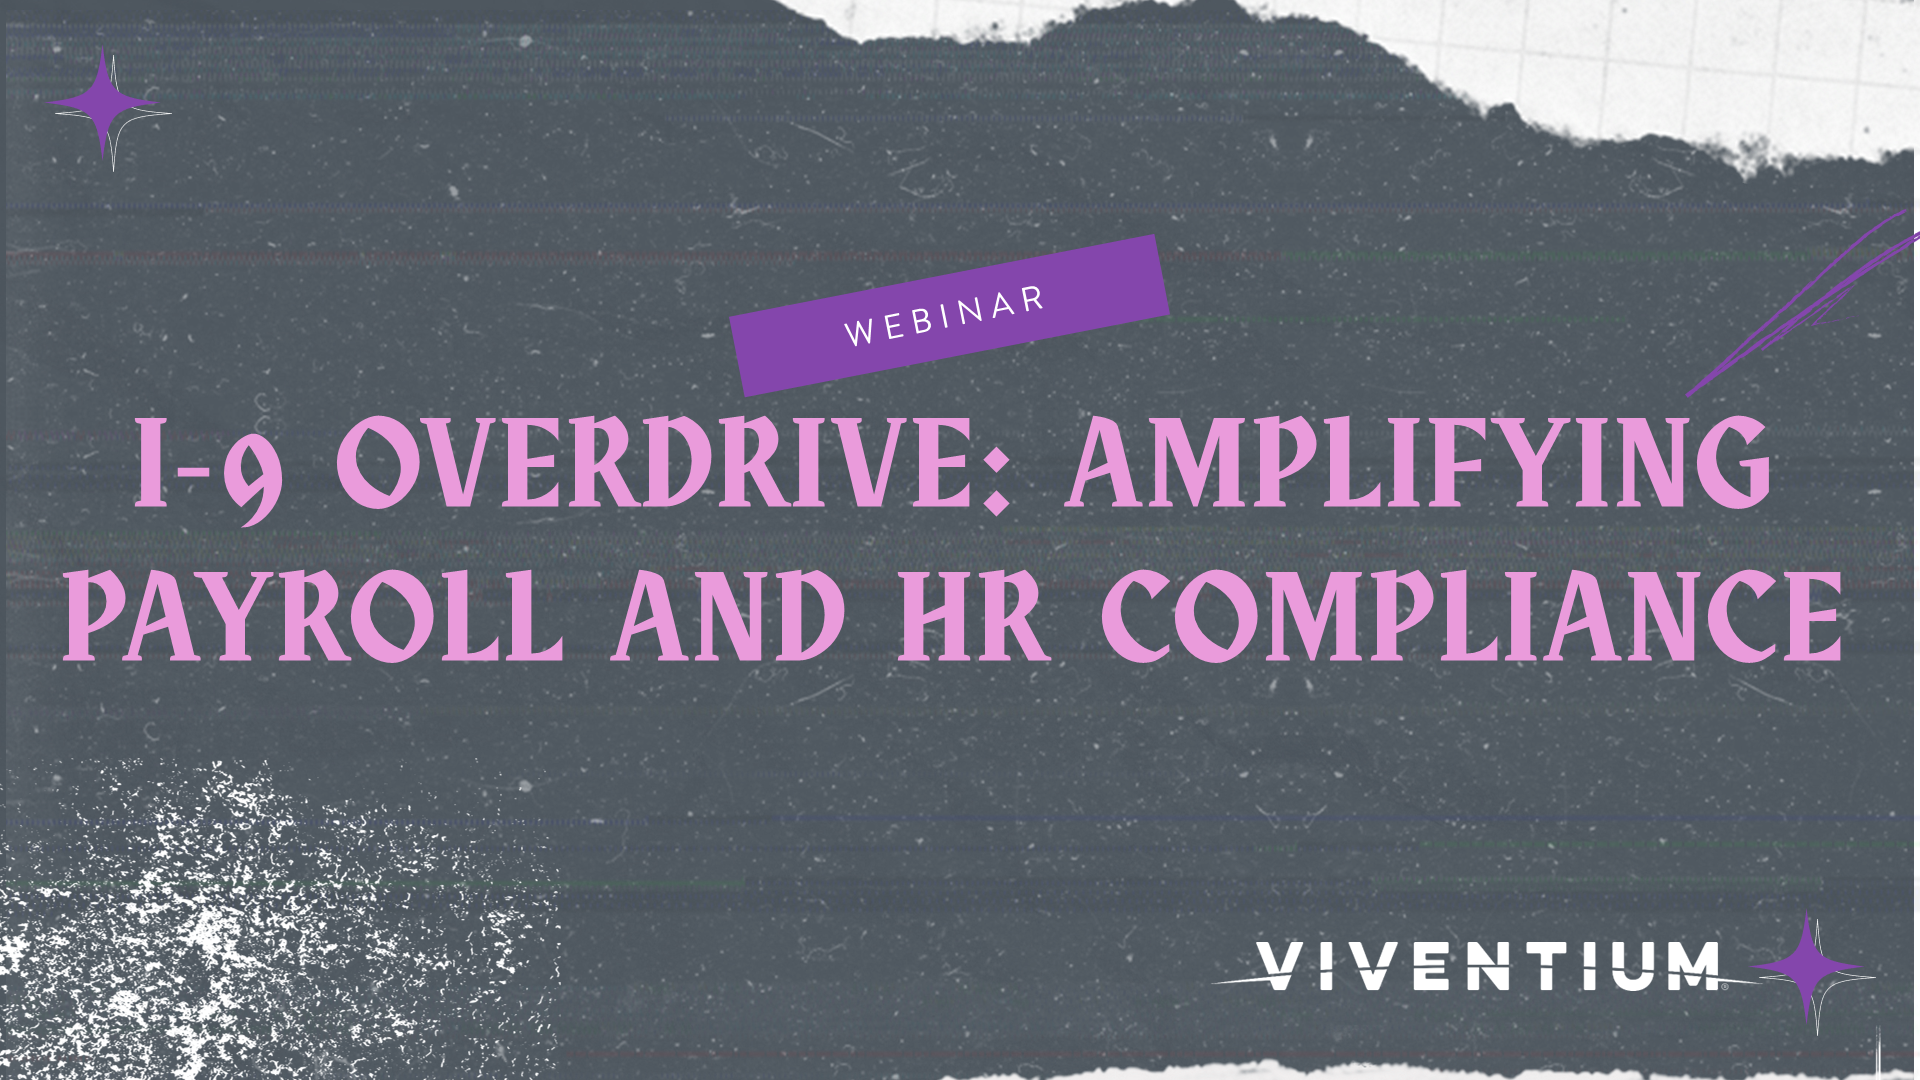 I-9 Overdrive Amplifying Payroll and HR Compliance Webinar Image